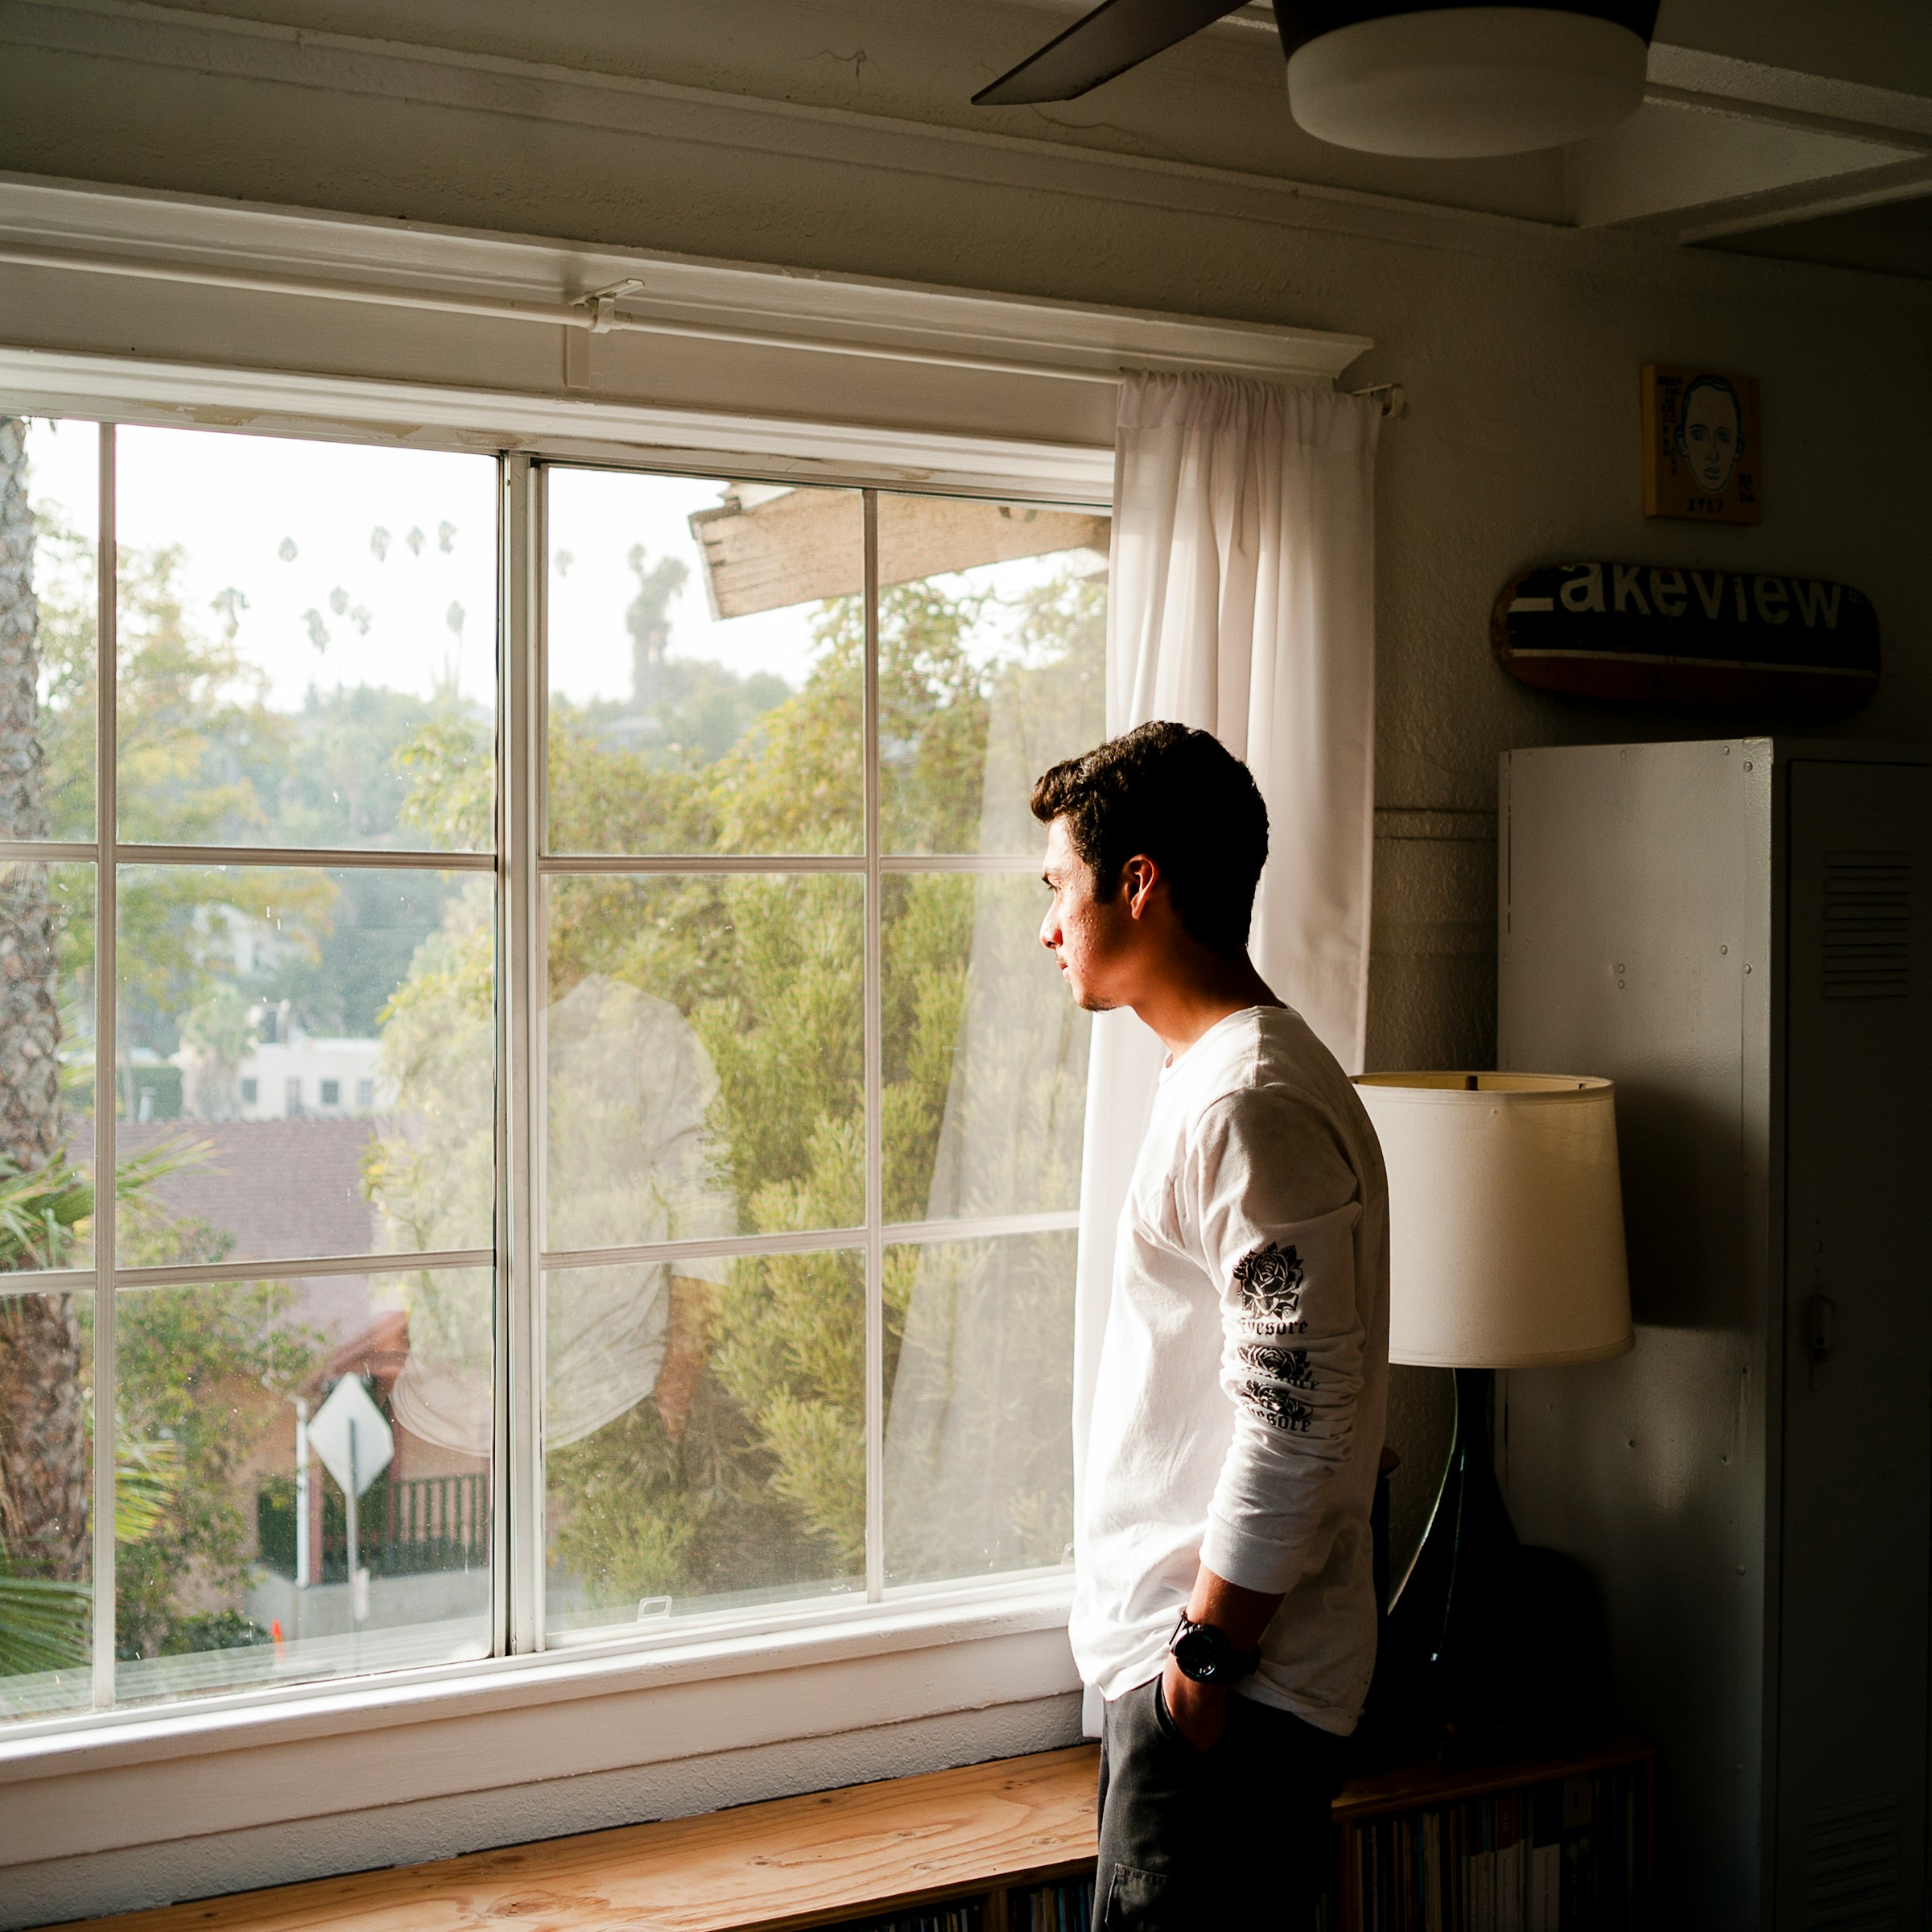 A man looking out the window | Source: Pexels